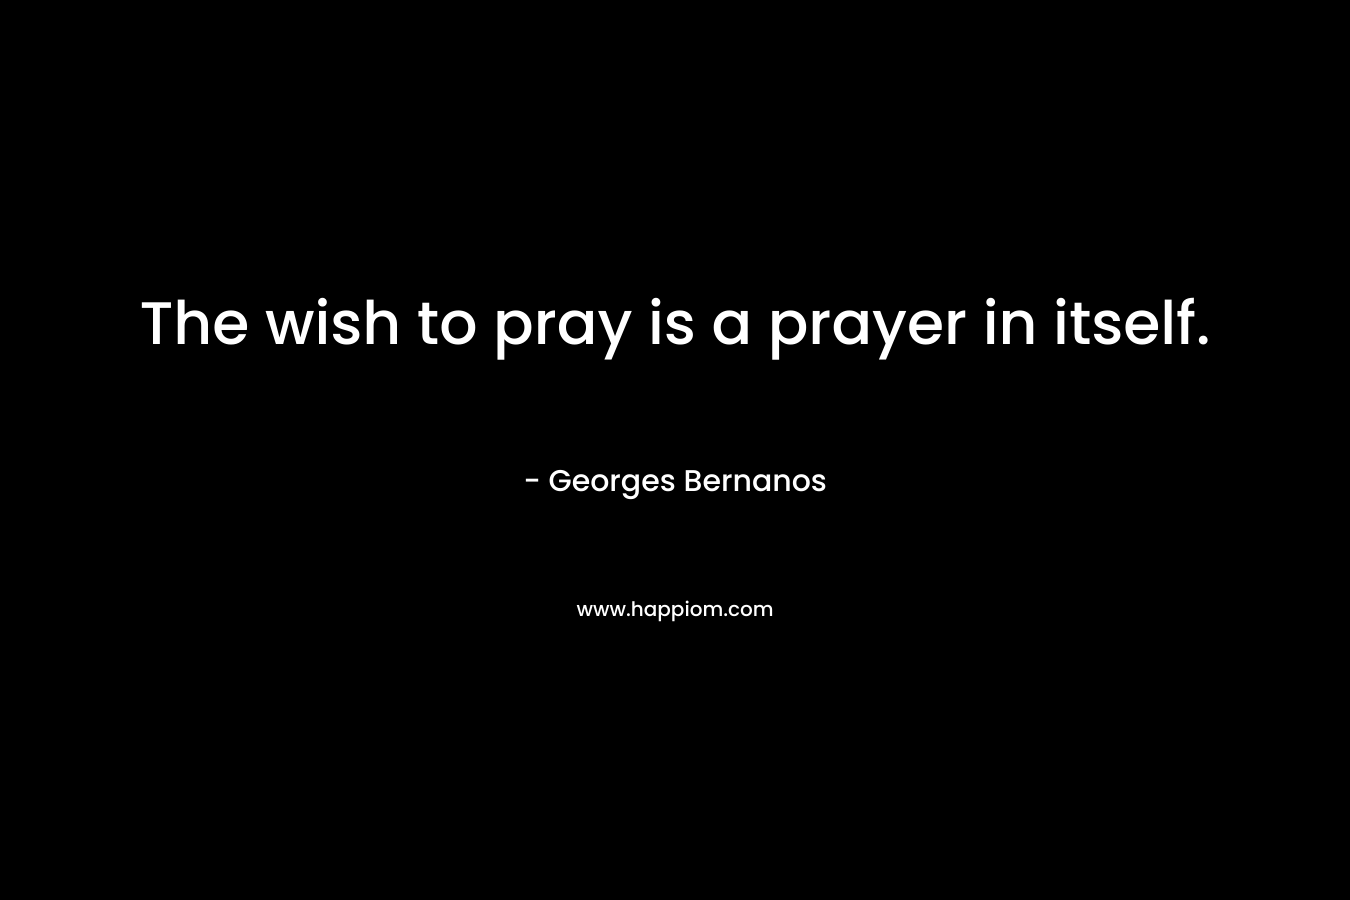 The wish to pray is a prayer in itself. – Georges Bernanos